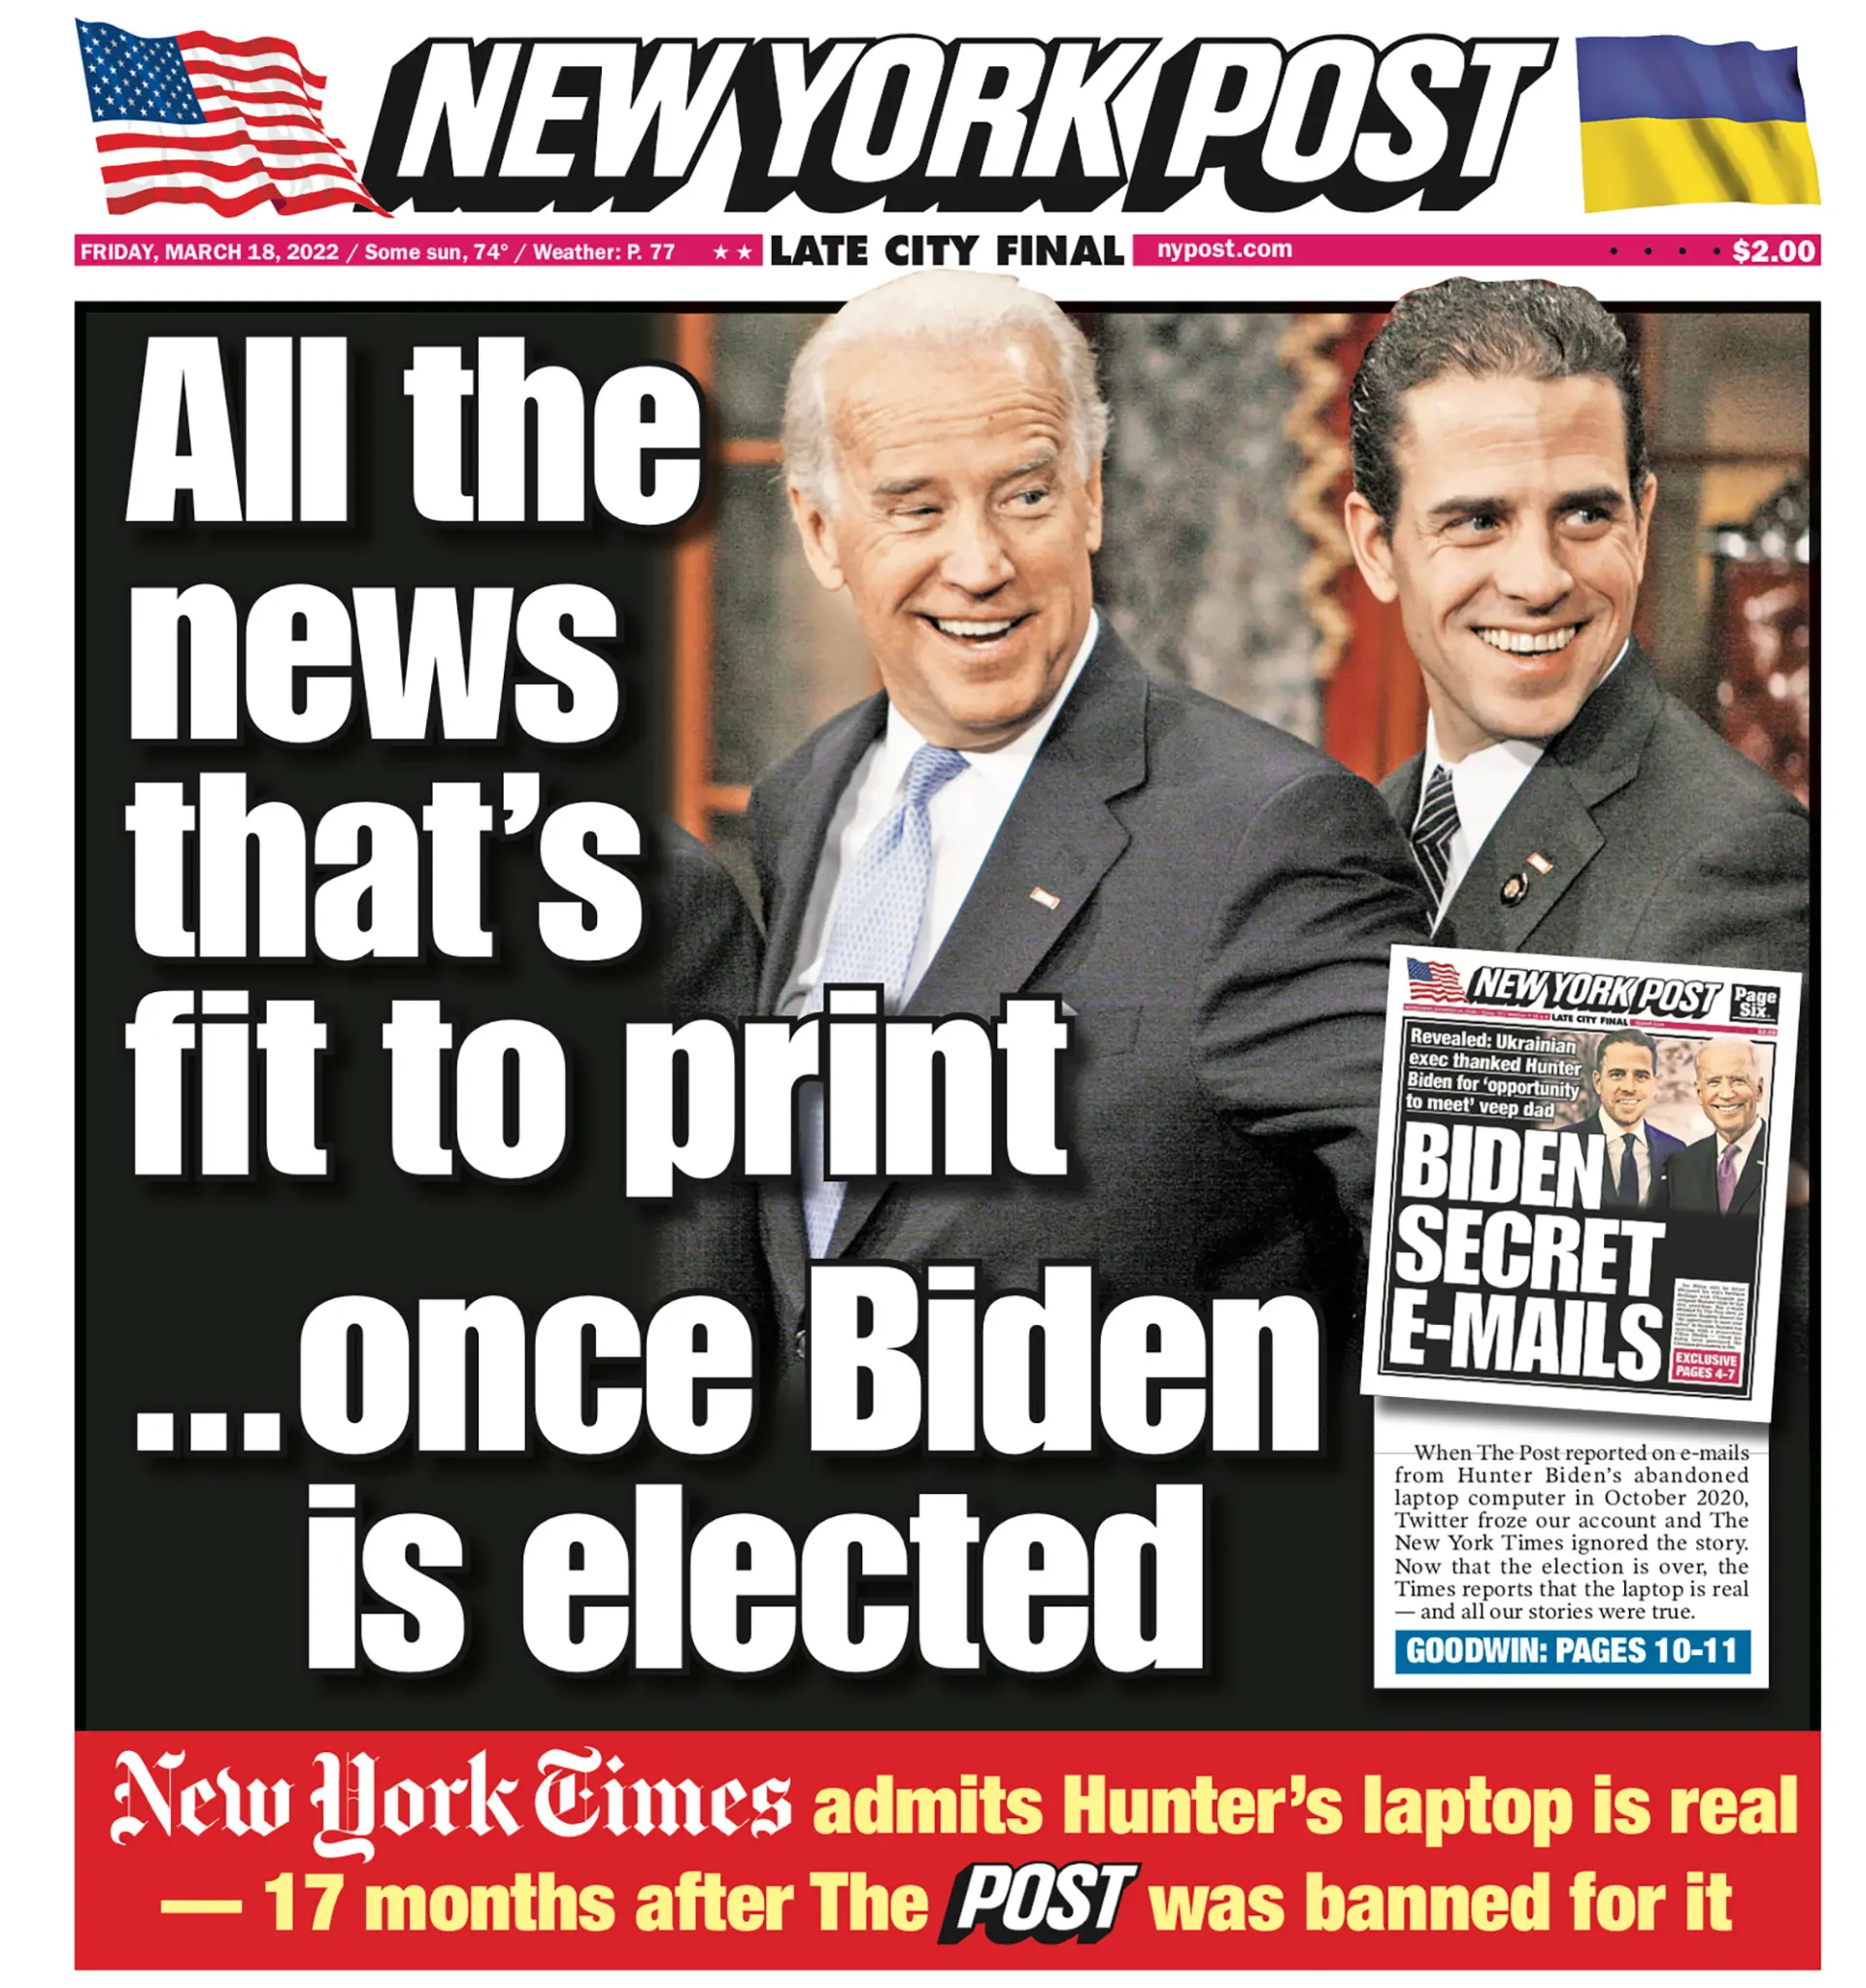 The New York Post printed information about the conspiracy around Hunter Biden’s laptop story.